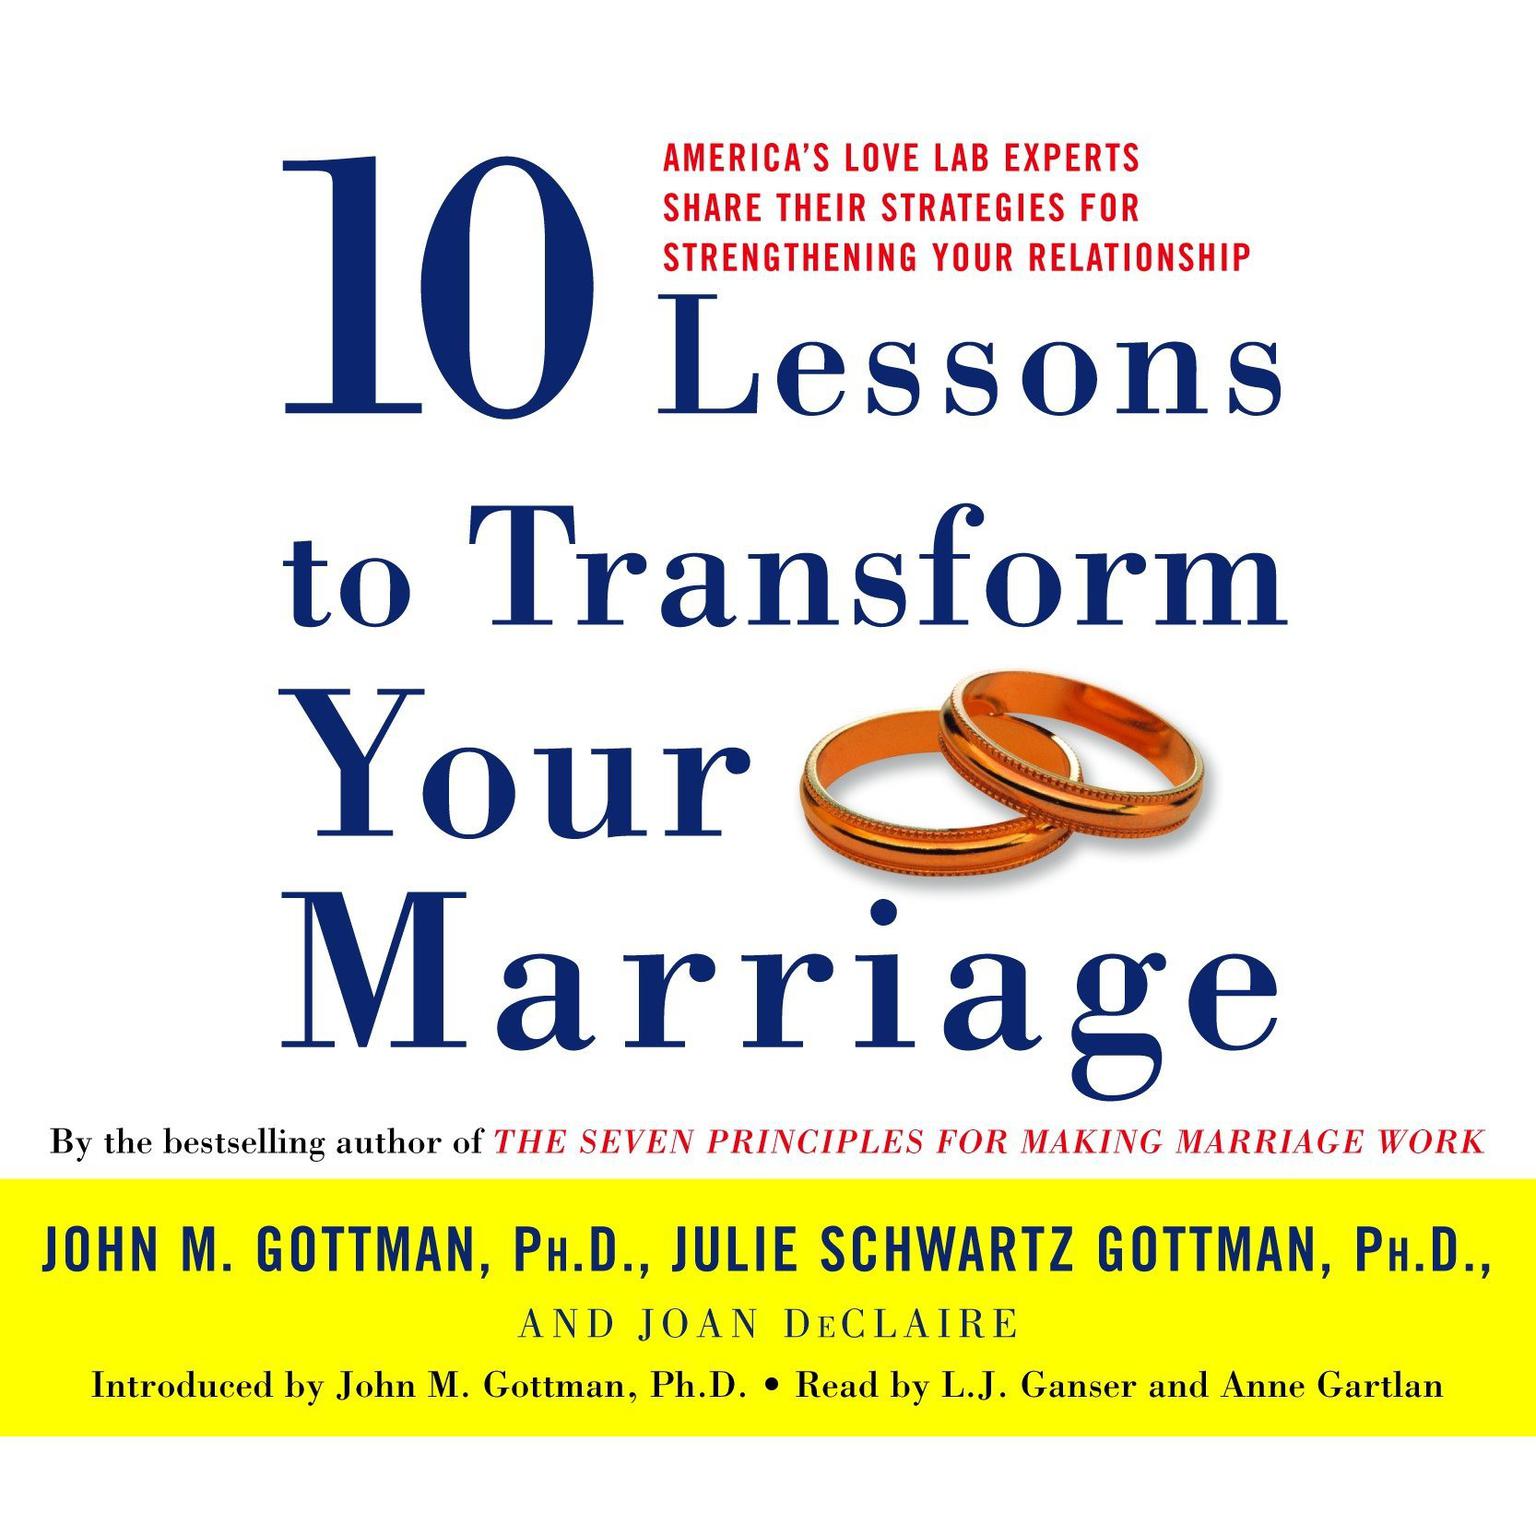 Ten Lessons to Transform Your Marriage (Abridged): Americas Love Lab Experts Share Their Strategies for Strengthening Your Relationship Audiobook, by John M. Gottman